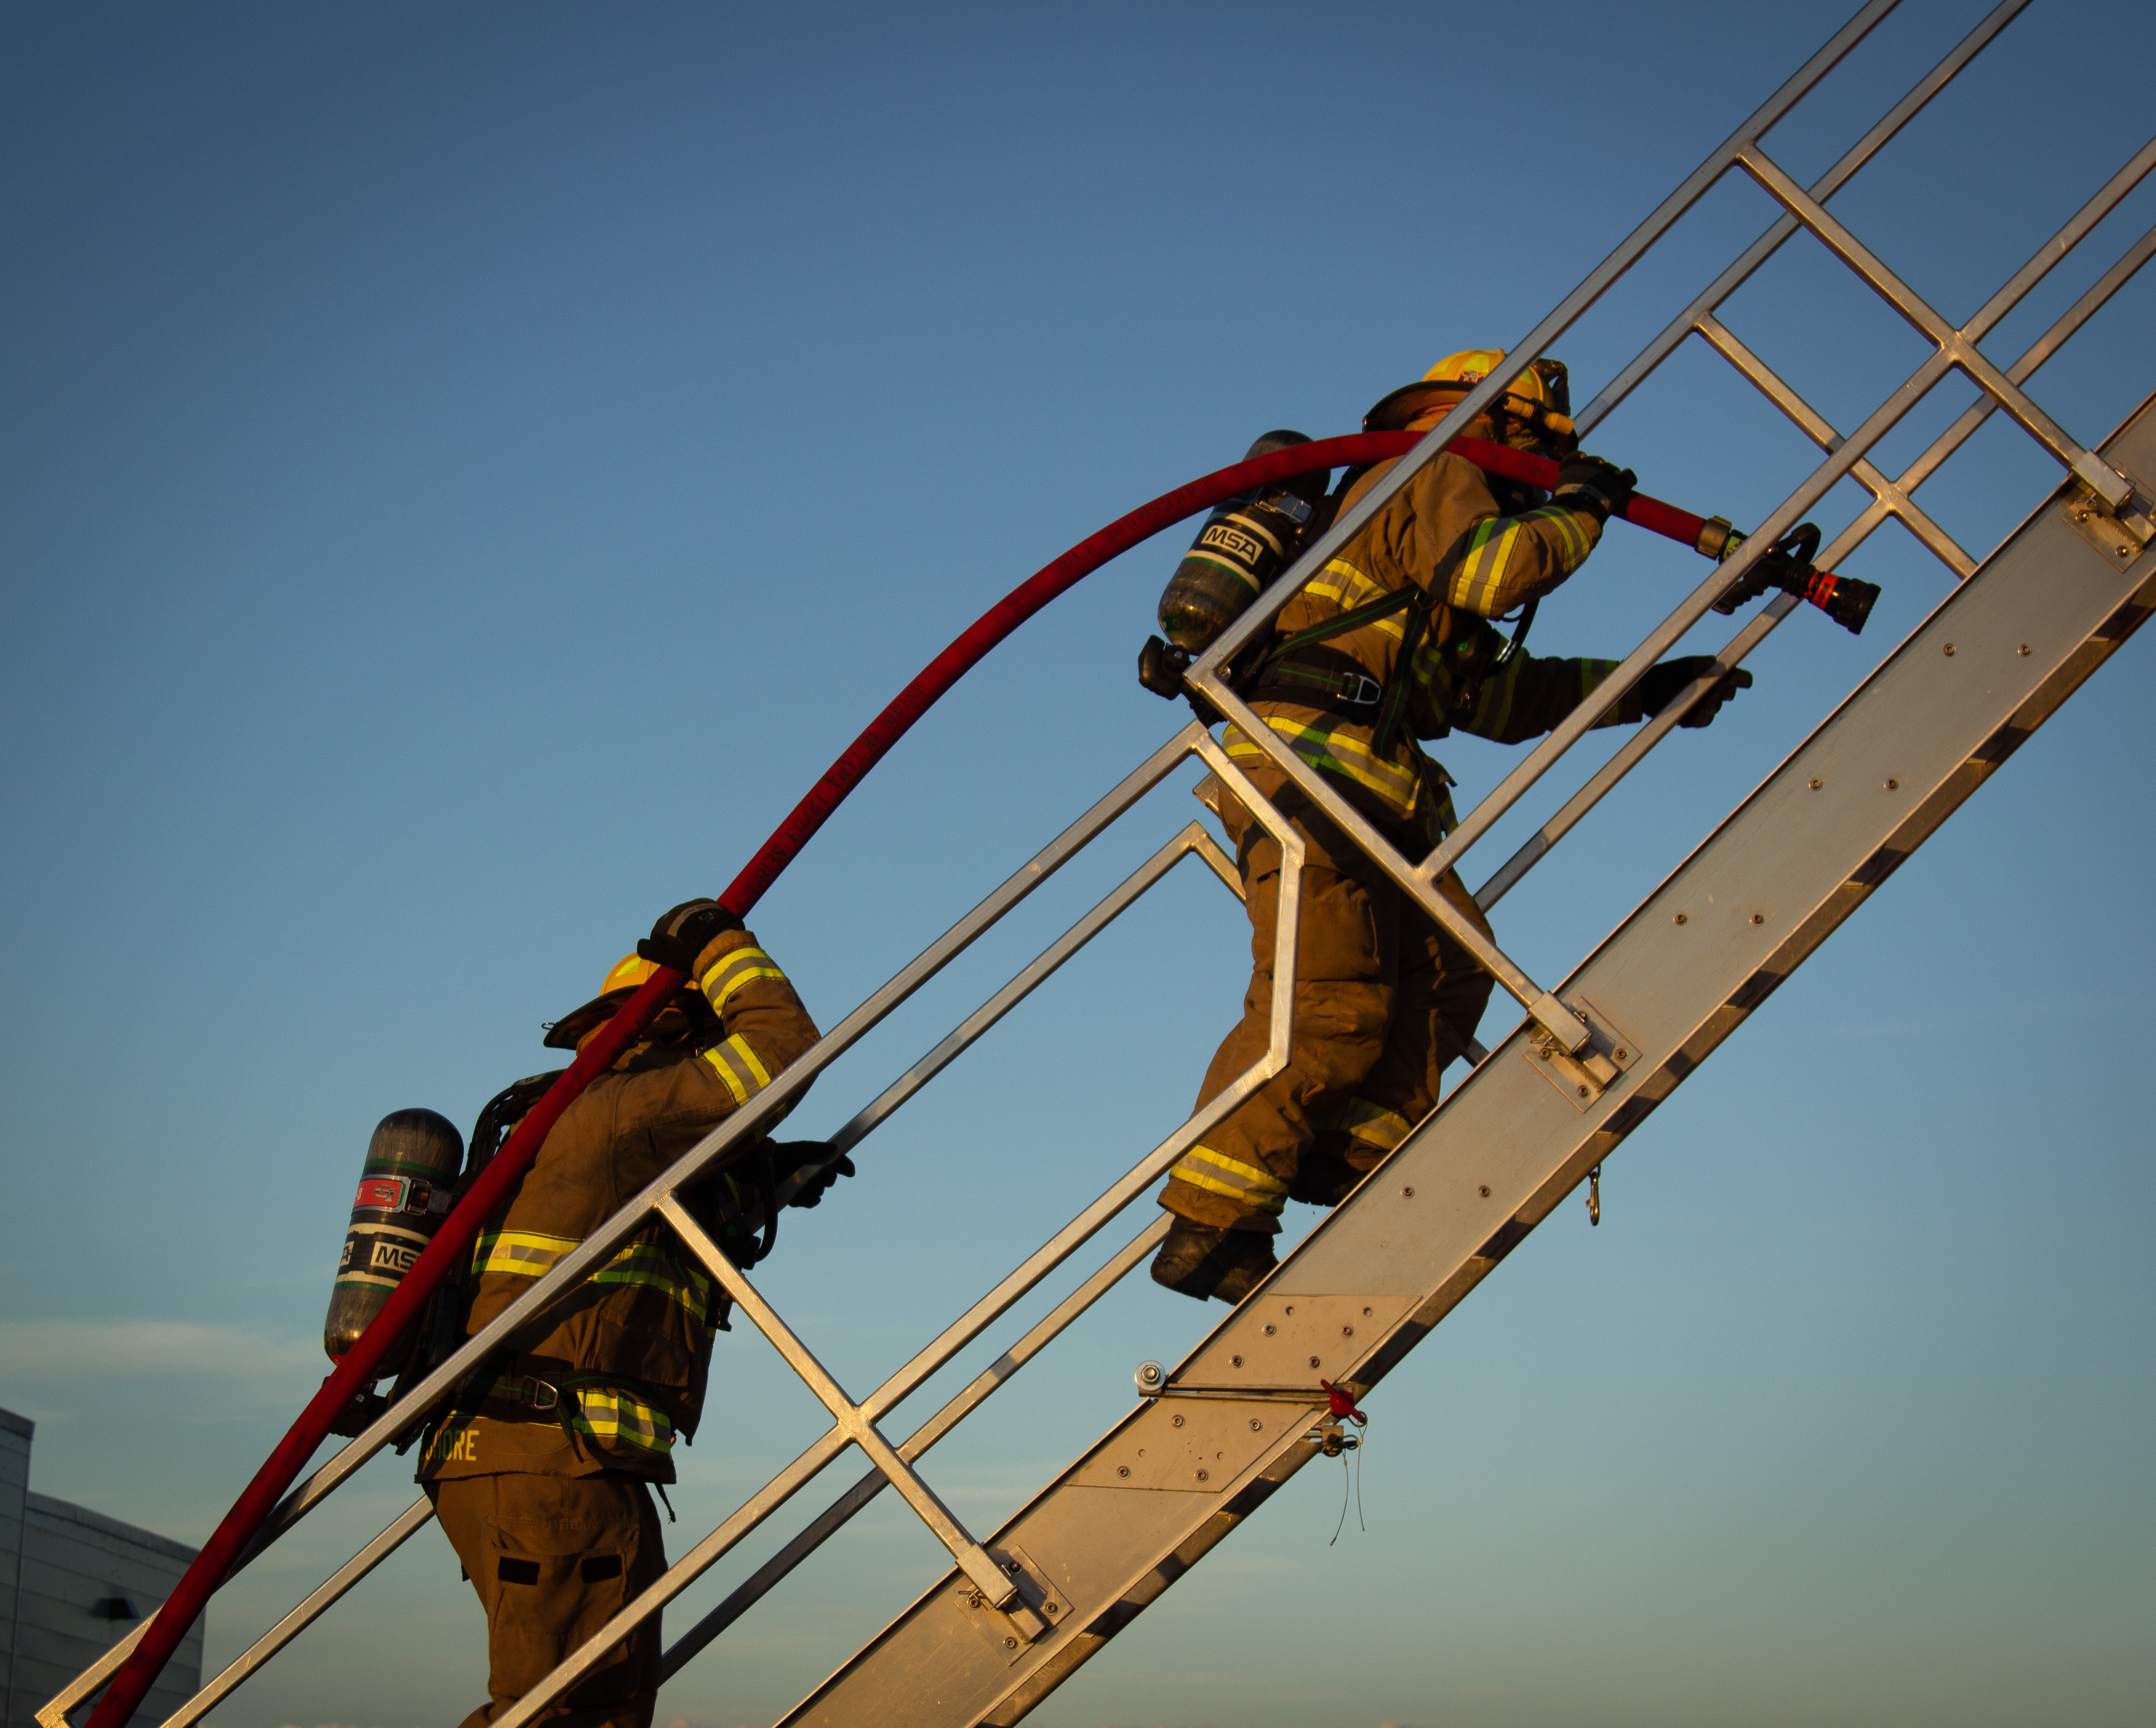 Two Lakeshore firefighters climbing a ladder truck while carrying a fire hose.